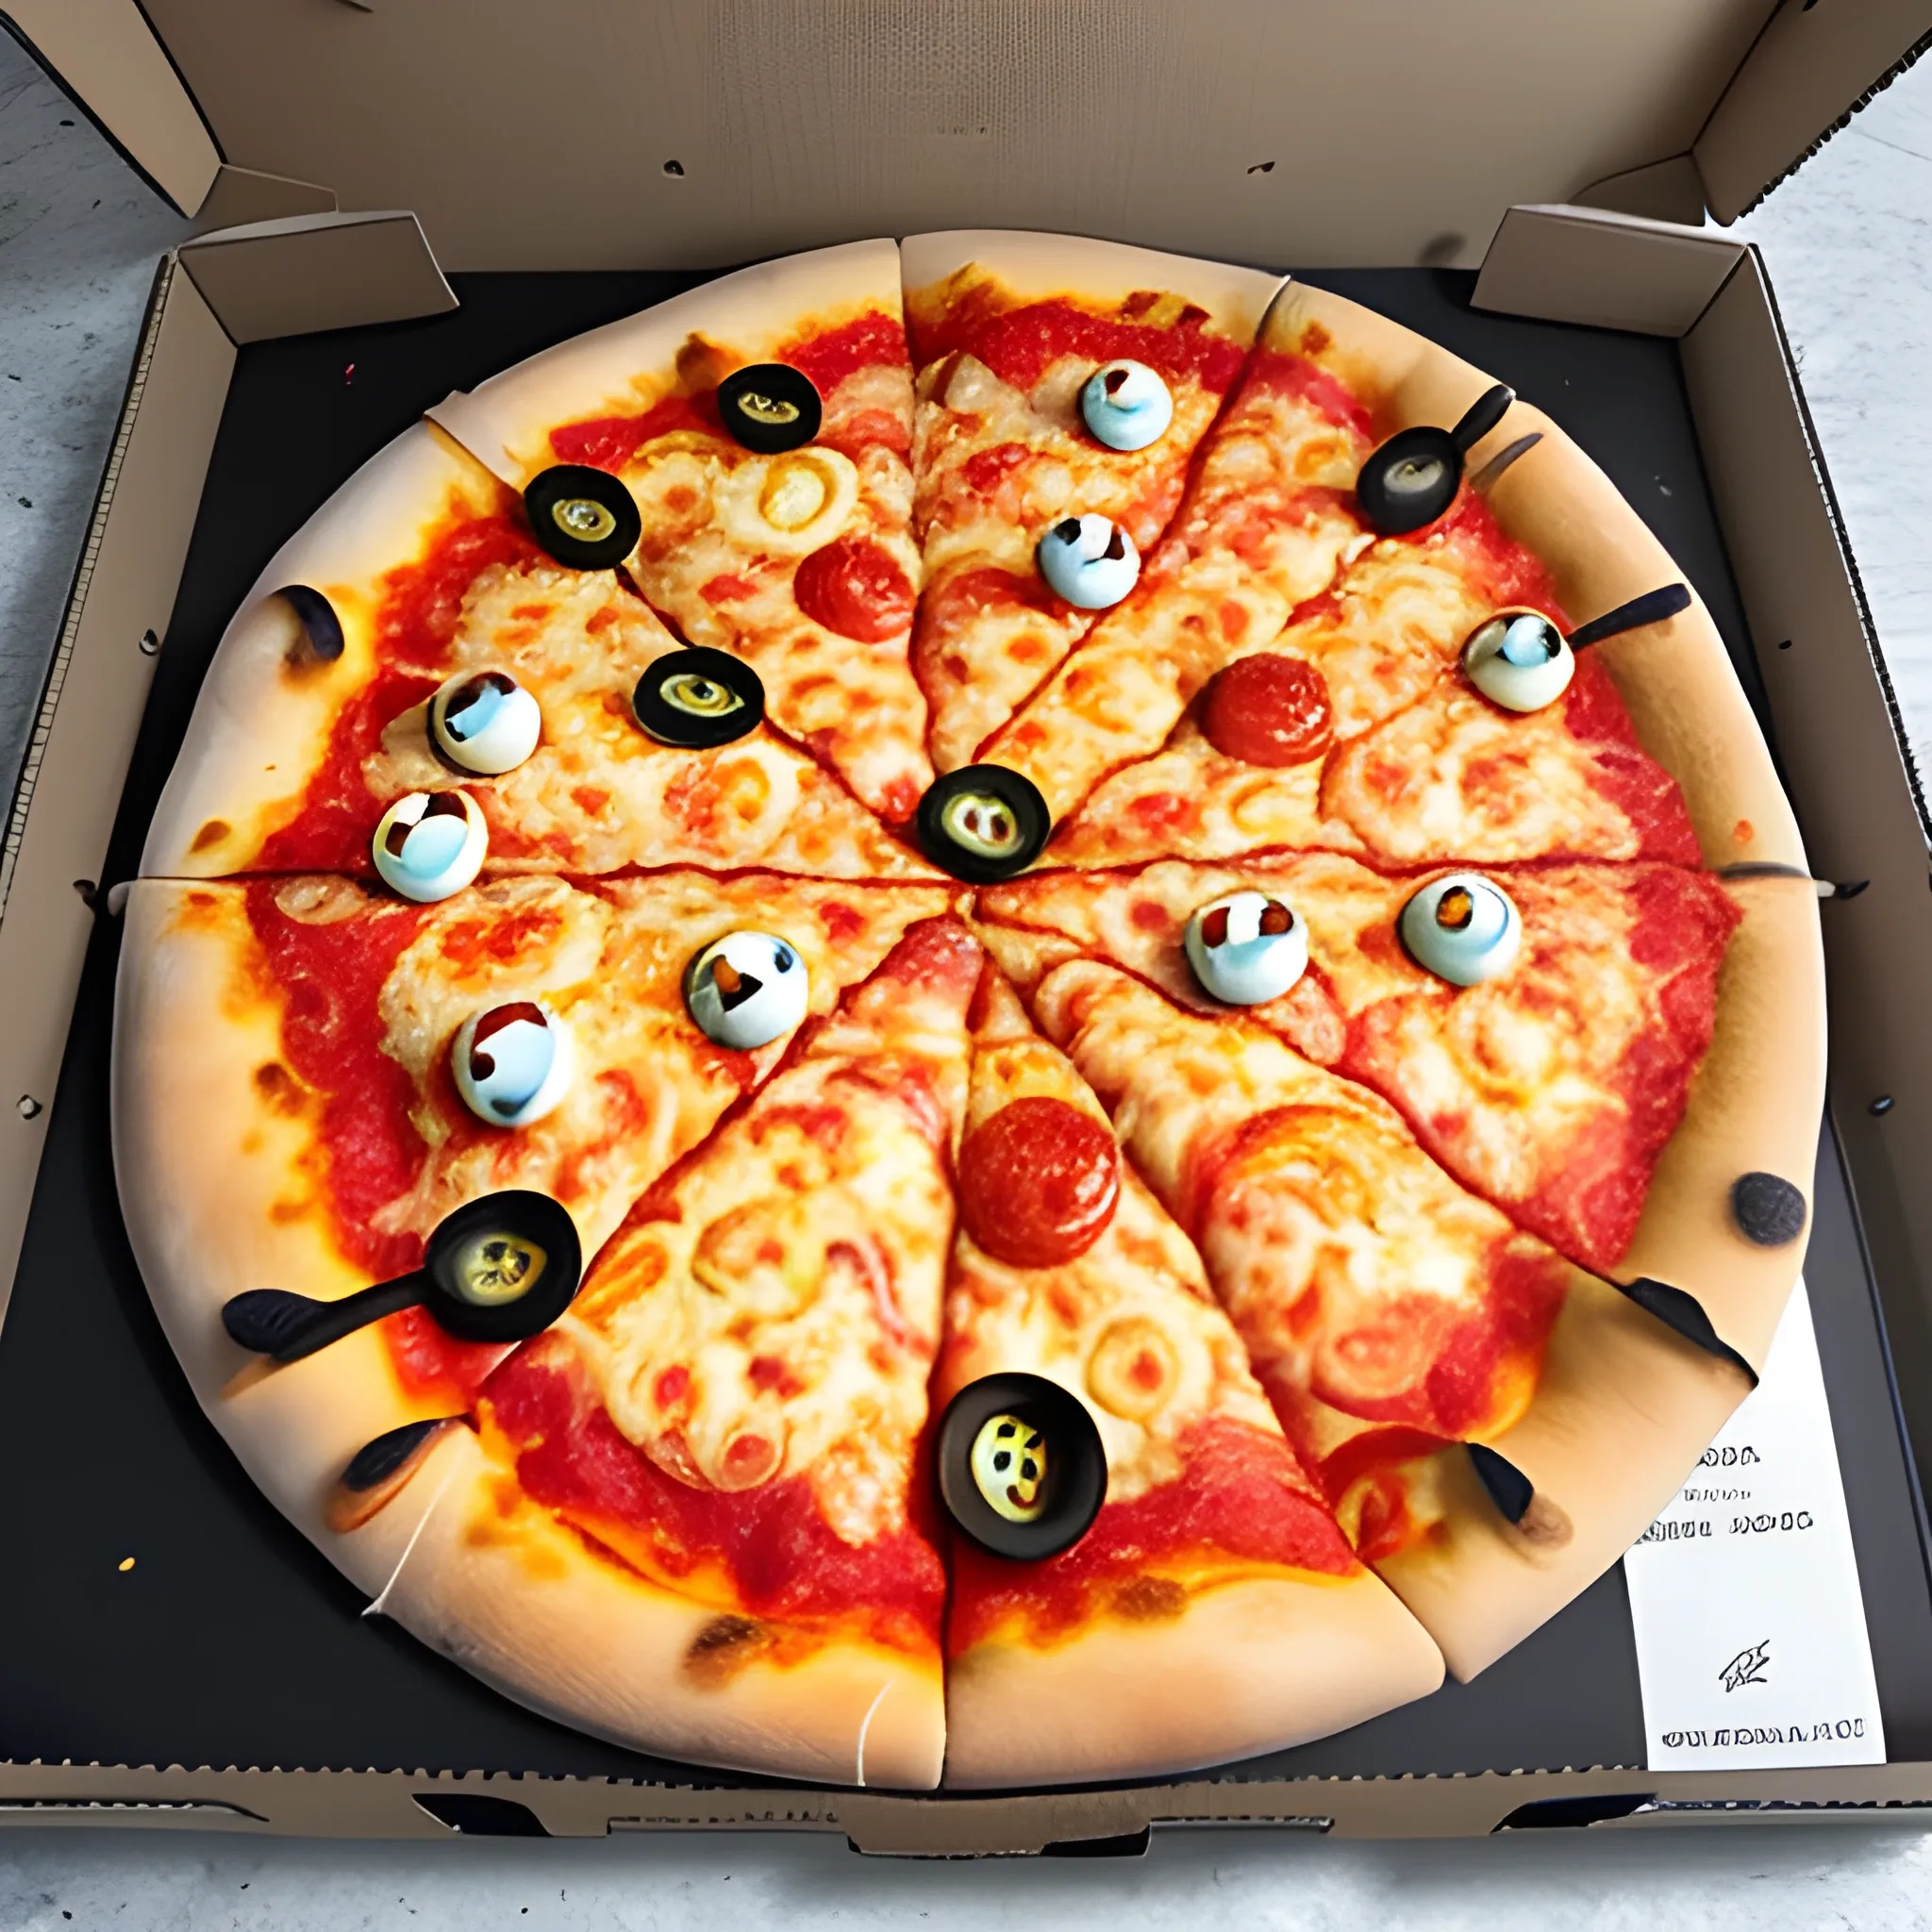 Best quality, realistic pizza with footballs and tomato sauce as toppings